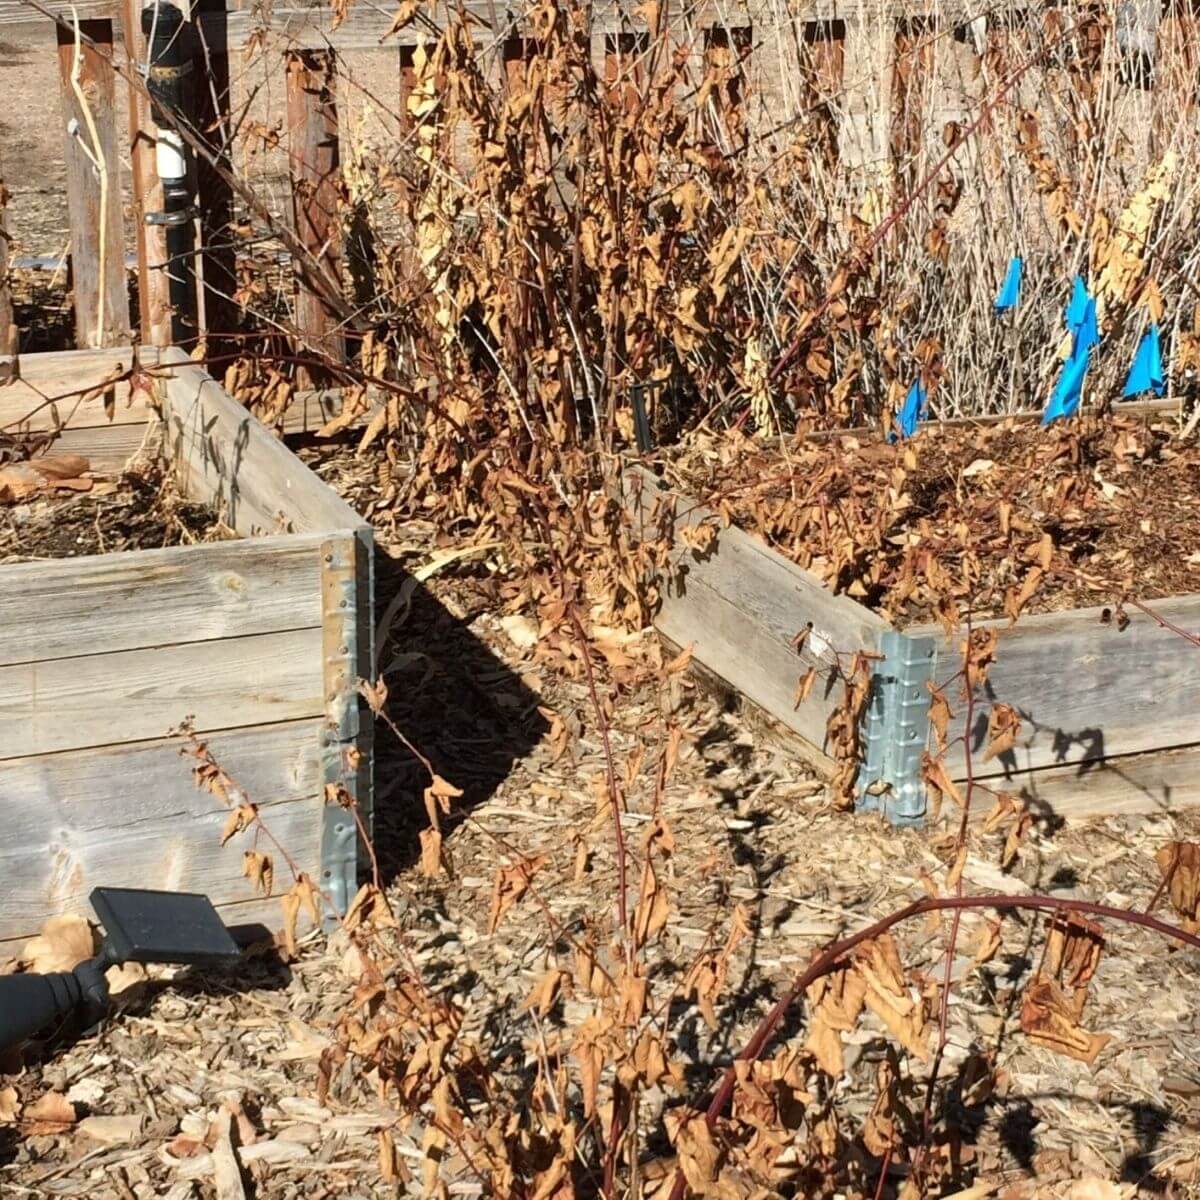 2 pallet collar raised garden beds one with two stacked, one with a single pallet collar both with dried plants inside in a mulch bed